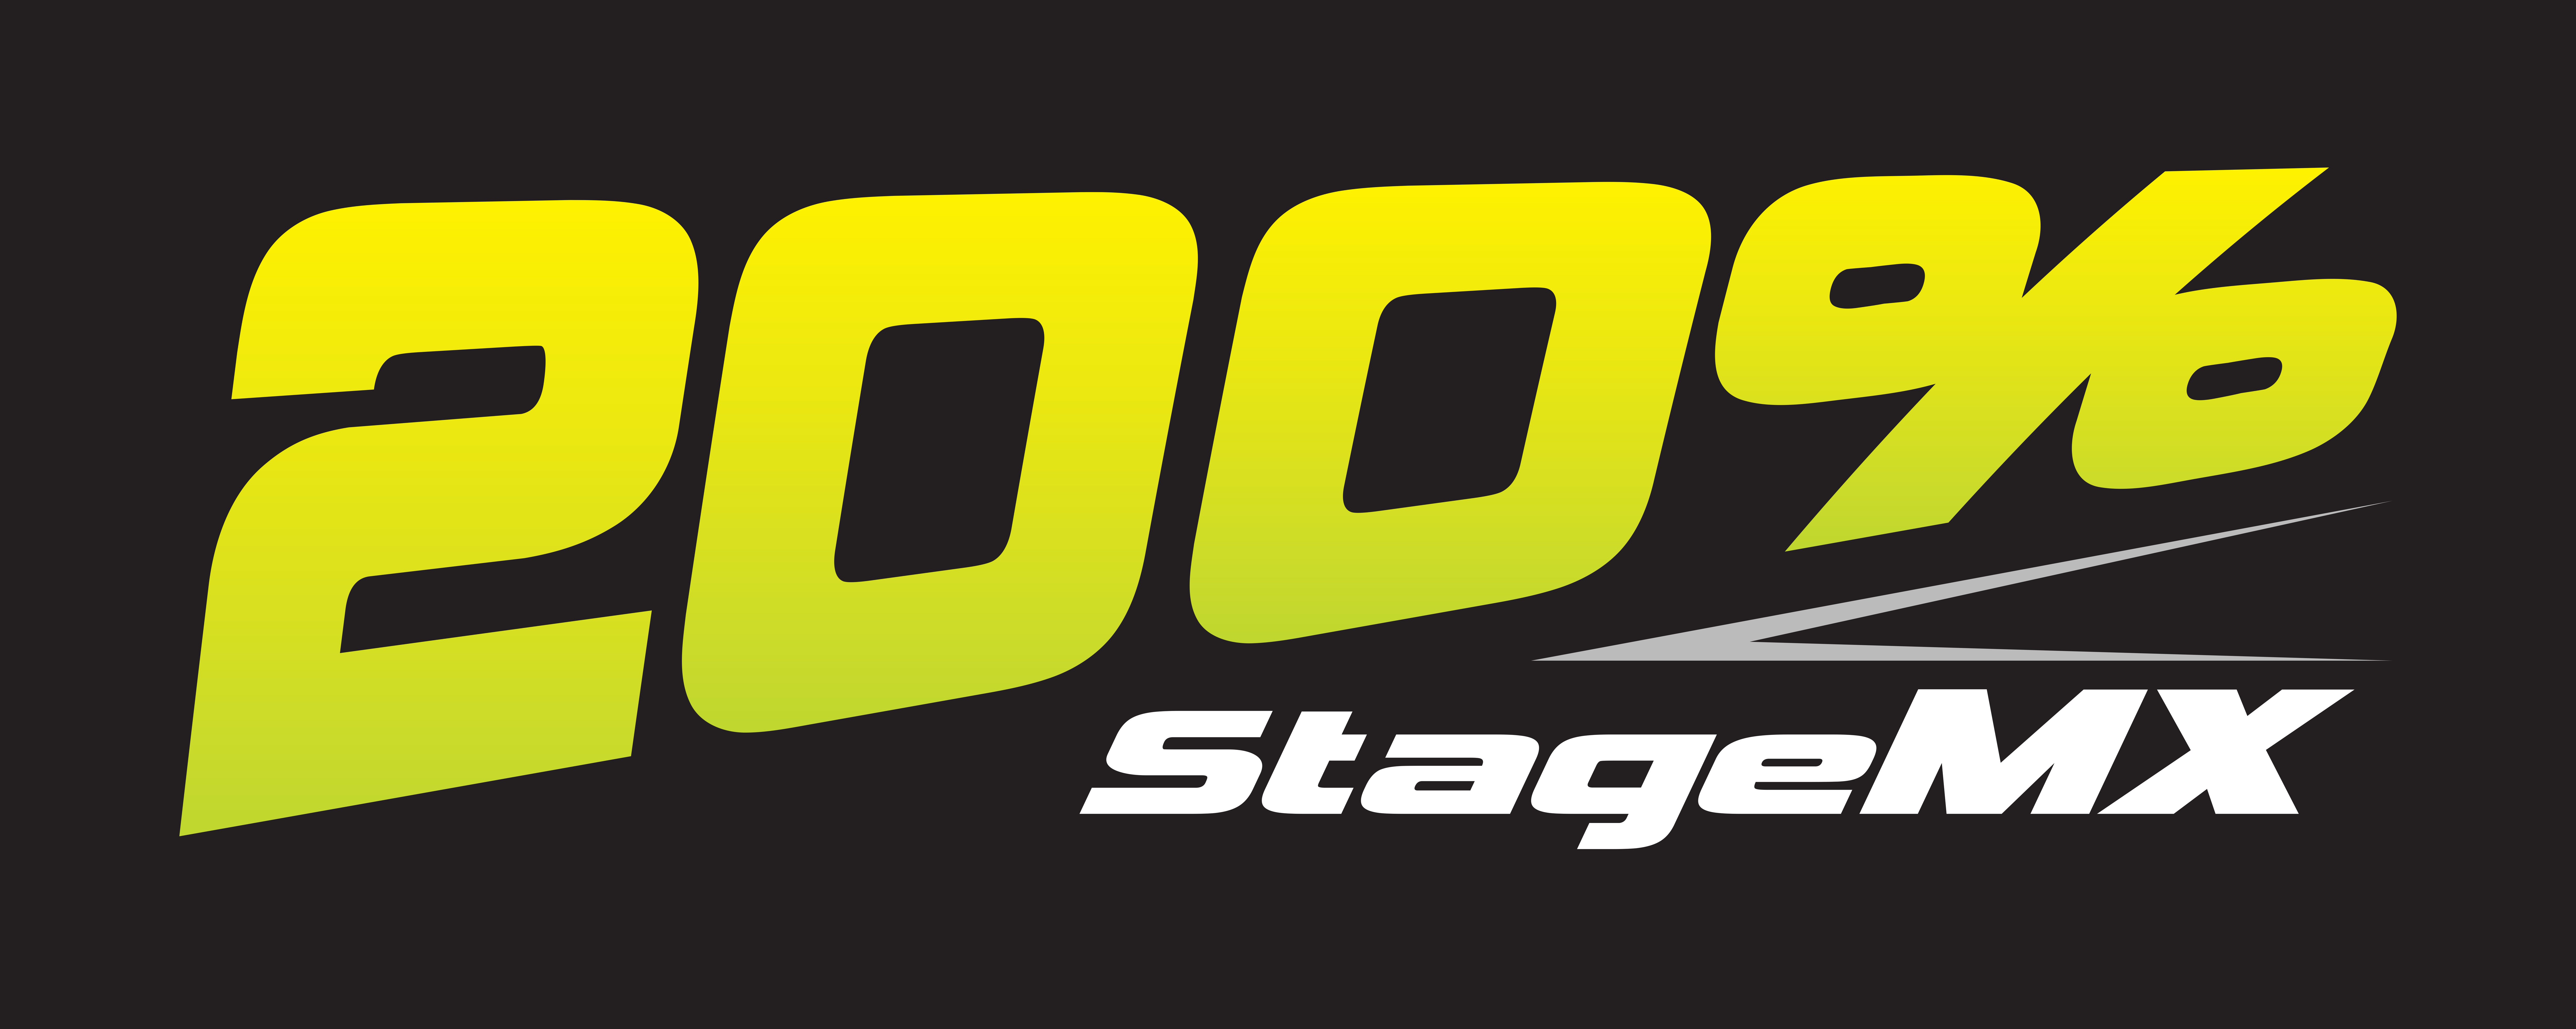 200% STAGE - Goby racing